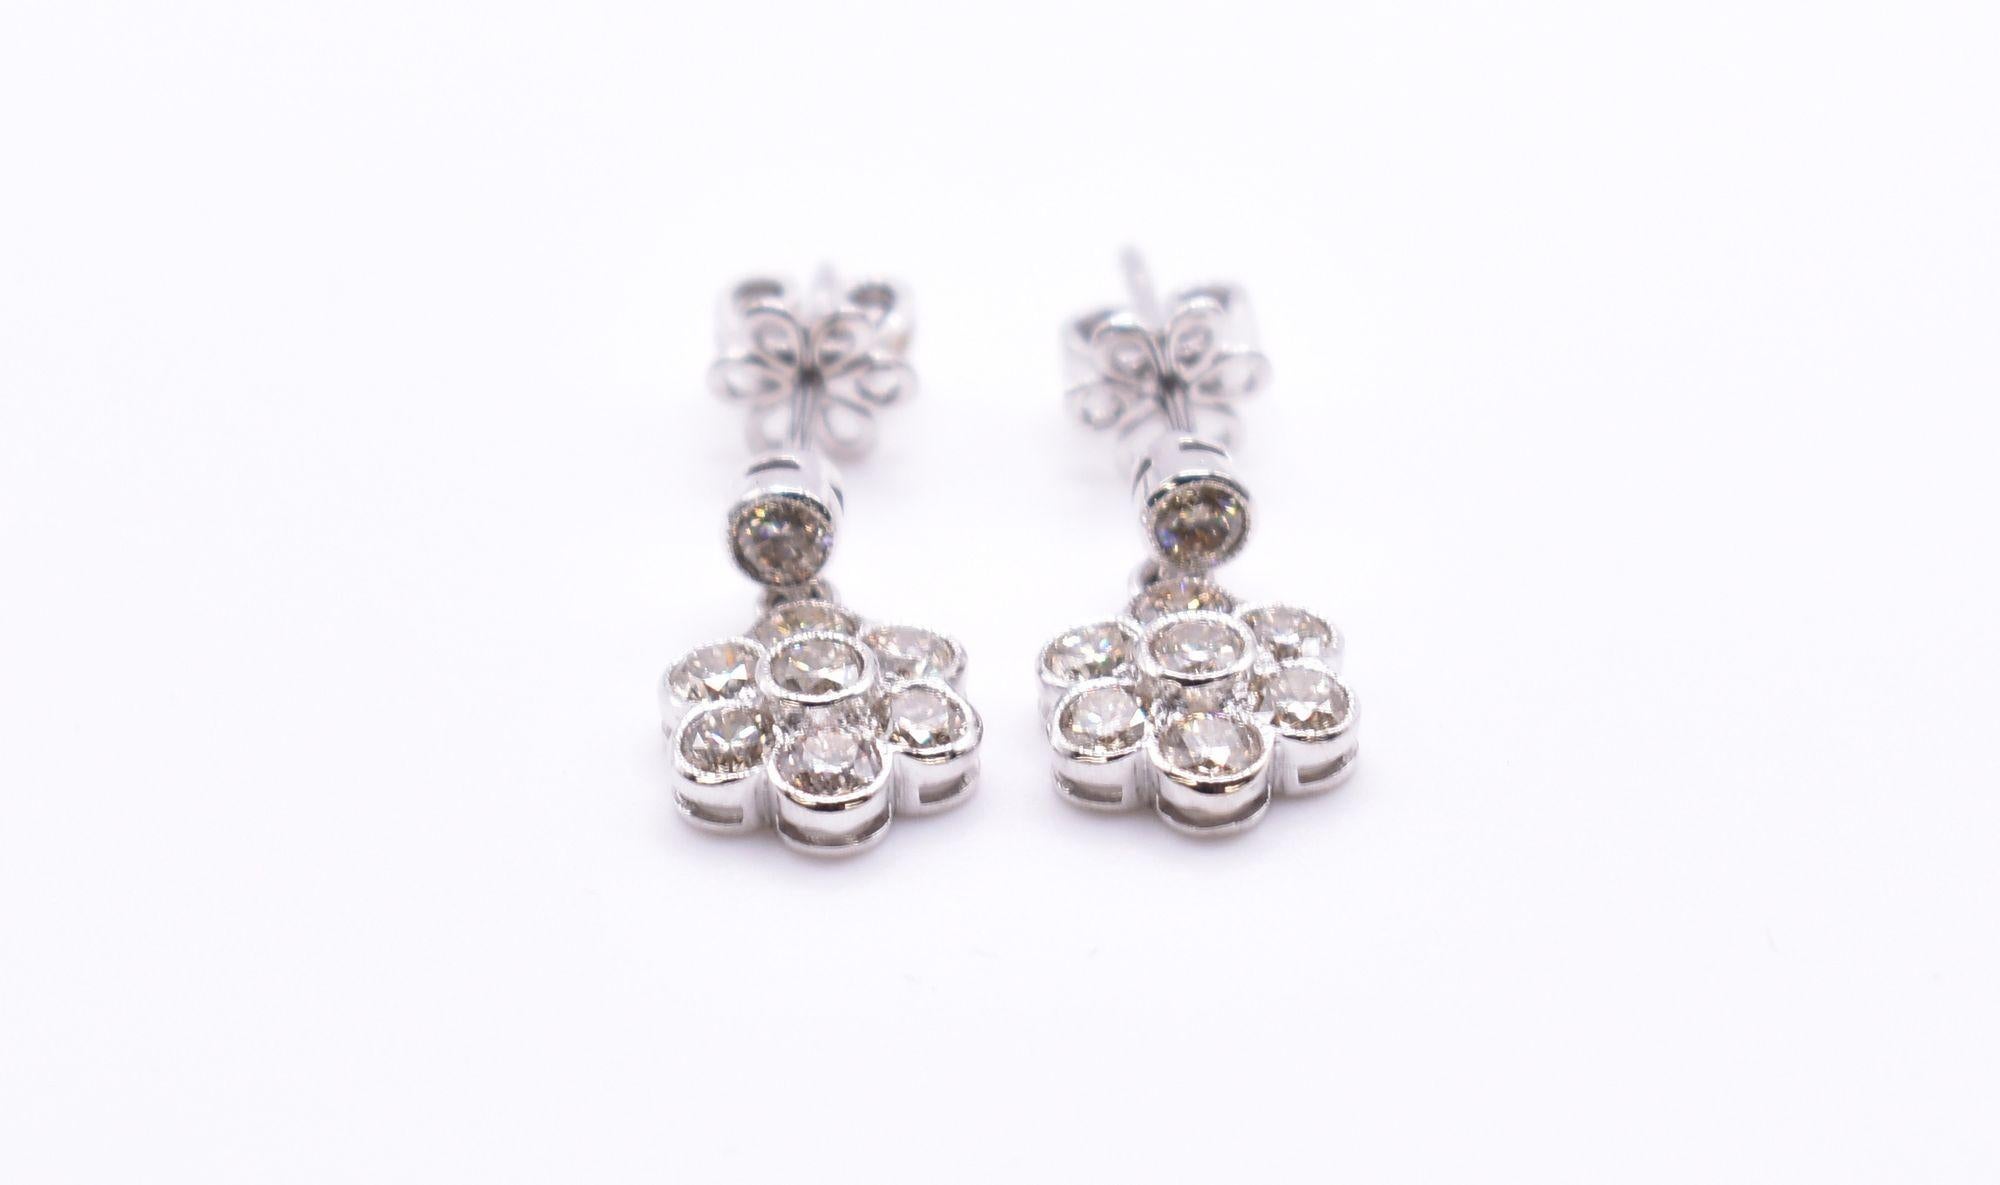 For sale is a fabulous pair of 18k white gold, 1.40ct diamond daisy drop earrings, comprising a total of 16 diamonds. Diamond weight: 1.40ct. VS-SI clarity, J/K Colour Total weight: 3.5g.

RRP: £2,500